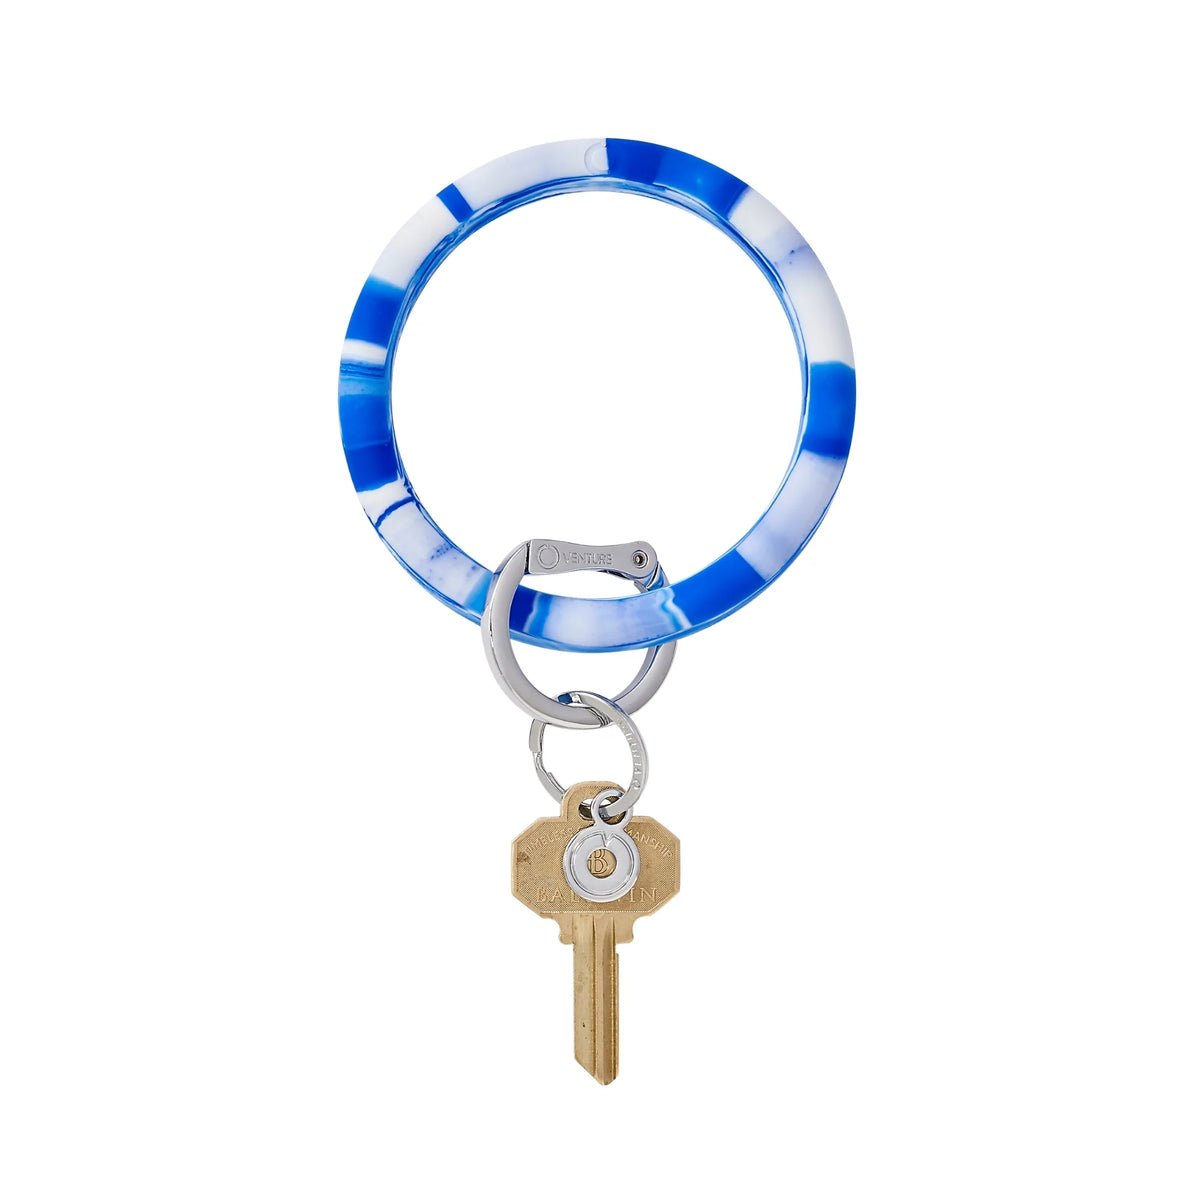 Oventure Key Ring Peacock Pearlized